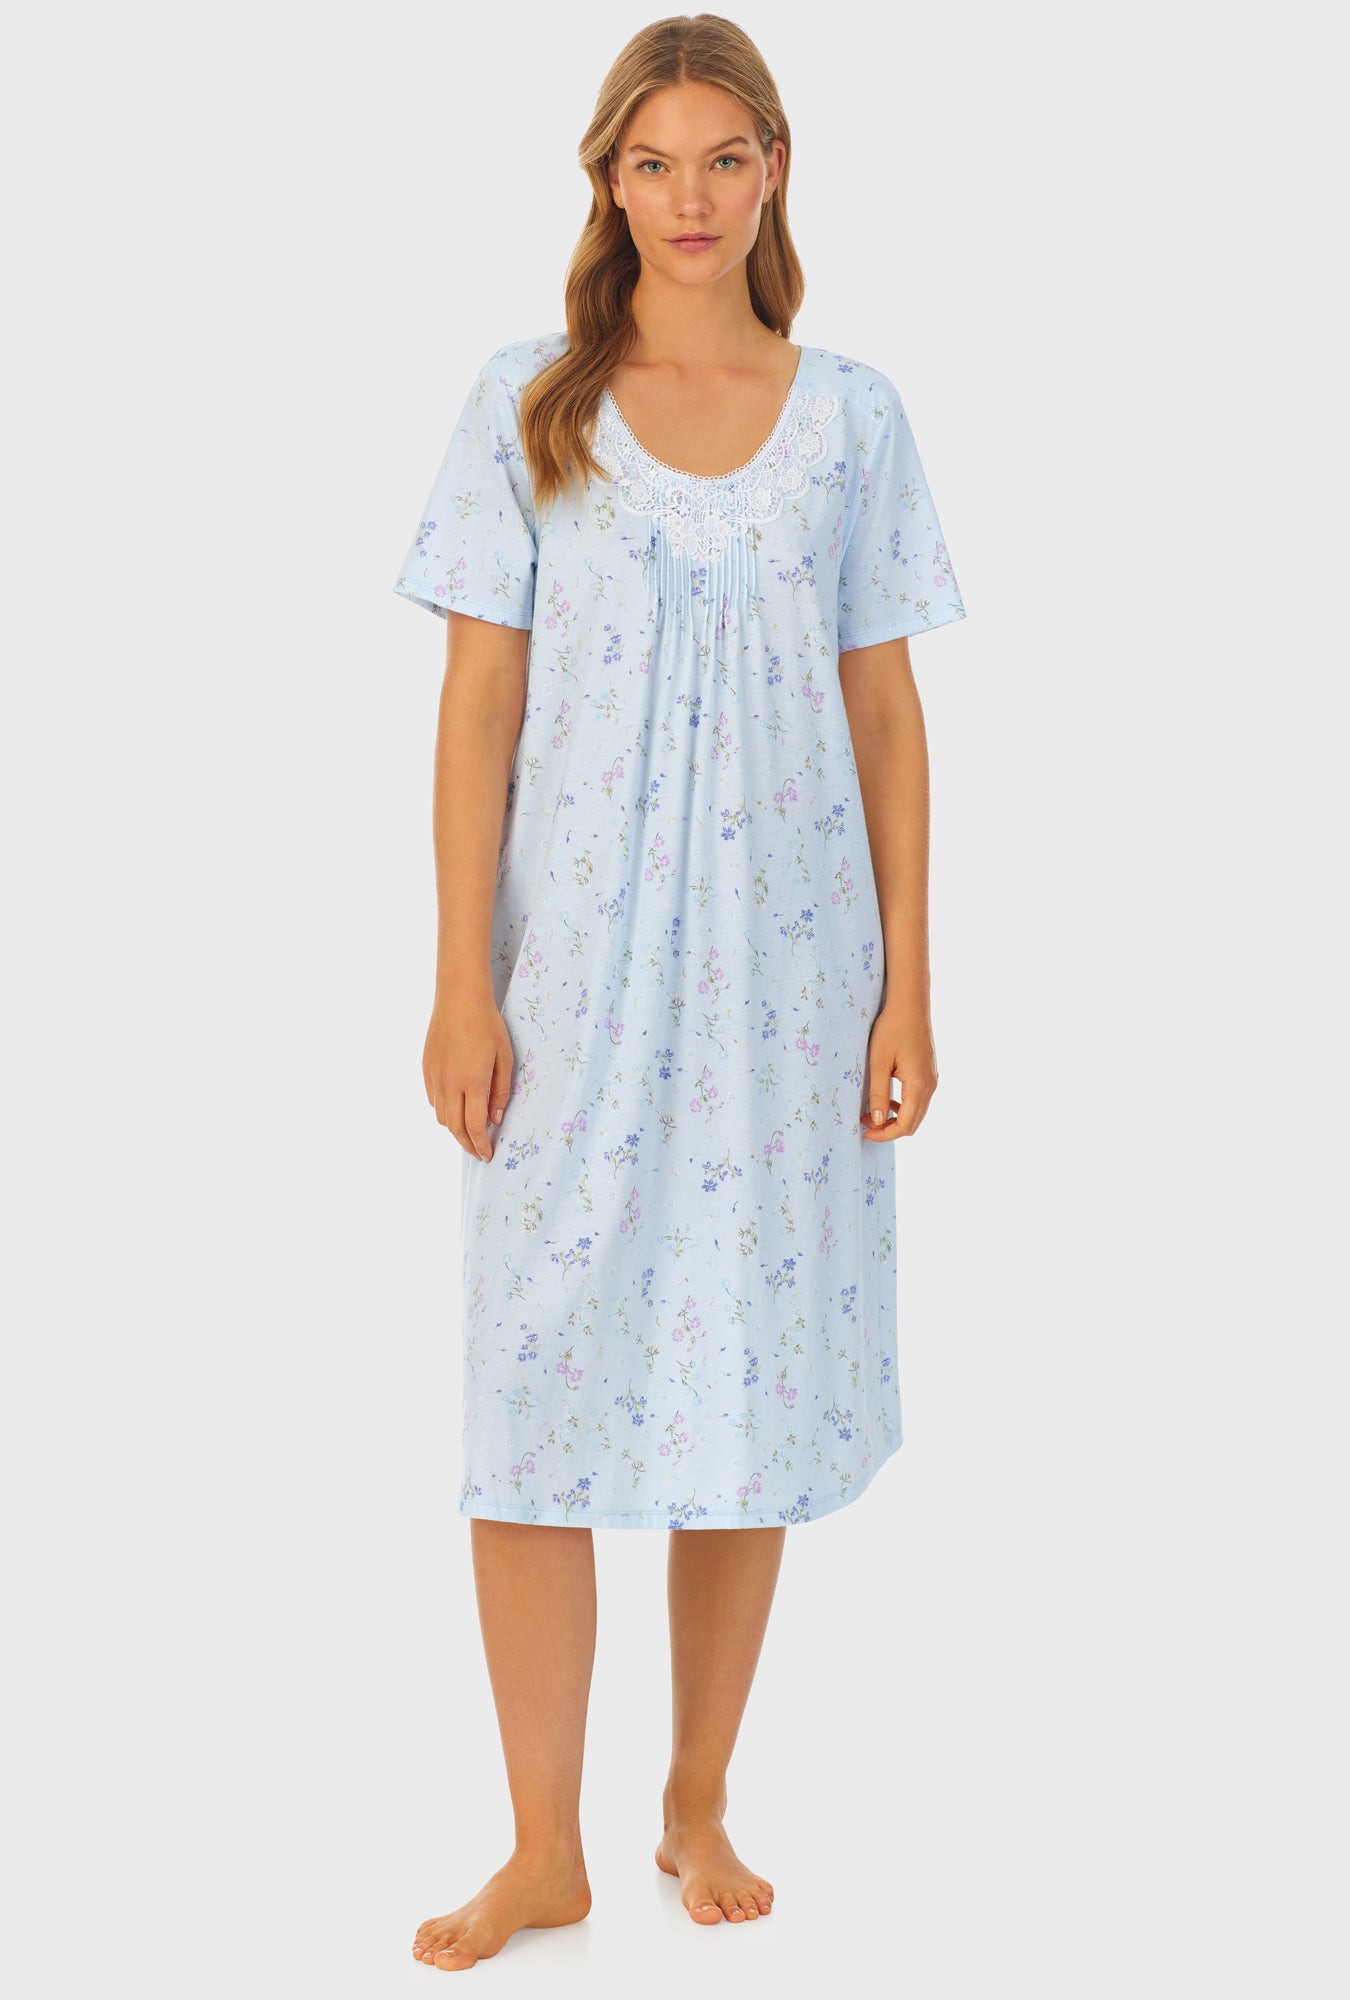 A lady wearing Cotton Waltz Nightgown with Spring Floral print